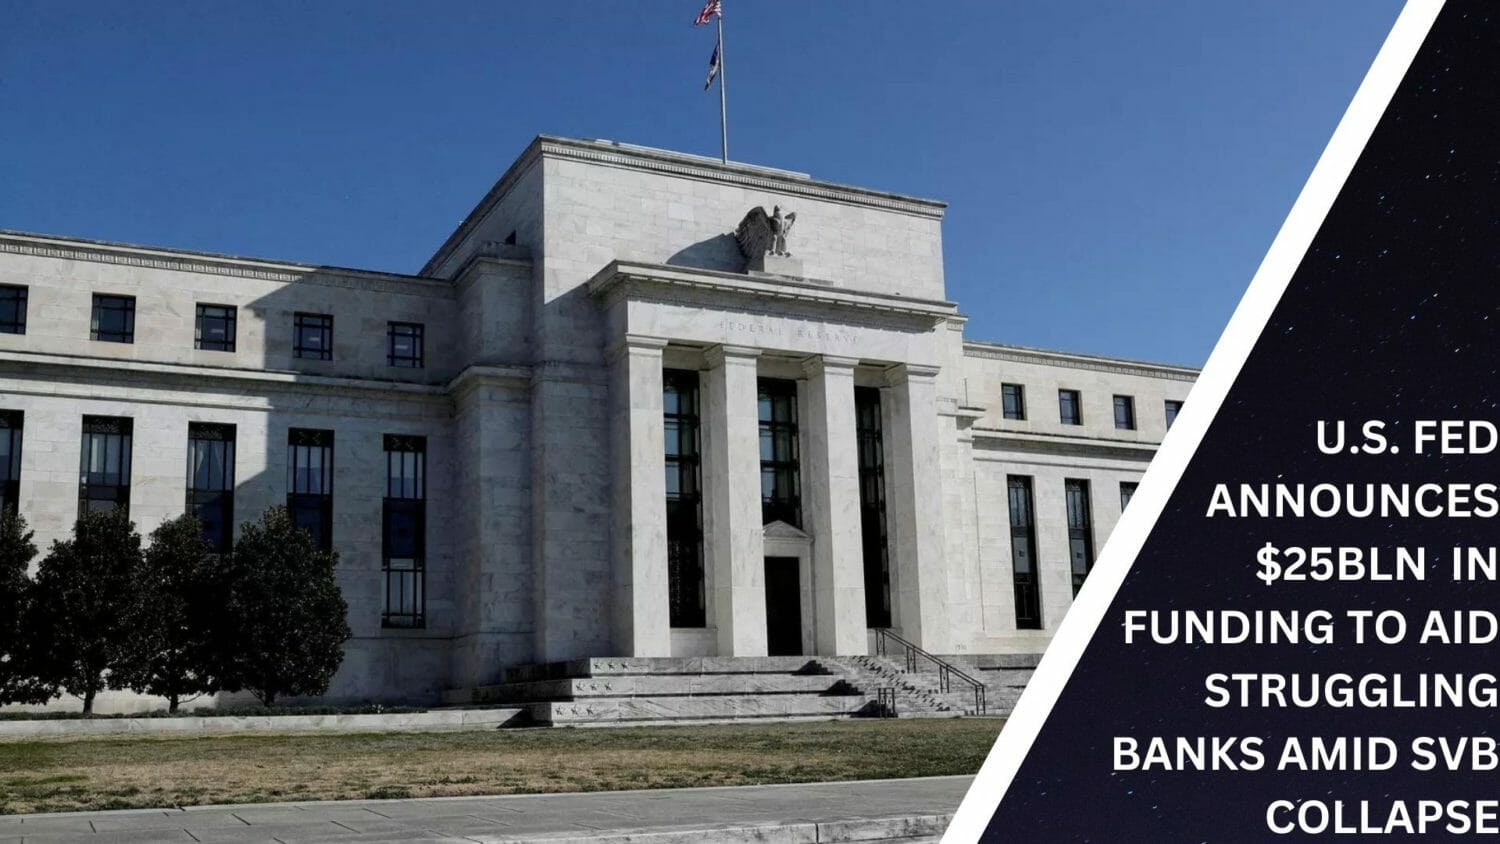 U.s. Fed Announces $25B In Funding To Aid Struggling Banks Amid Svb Collapse